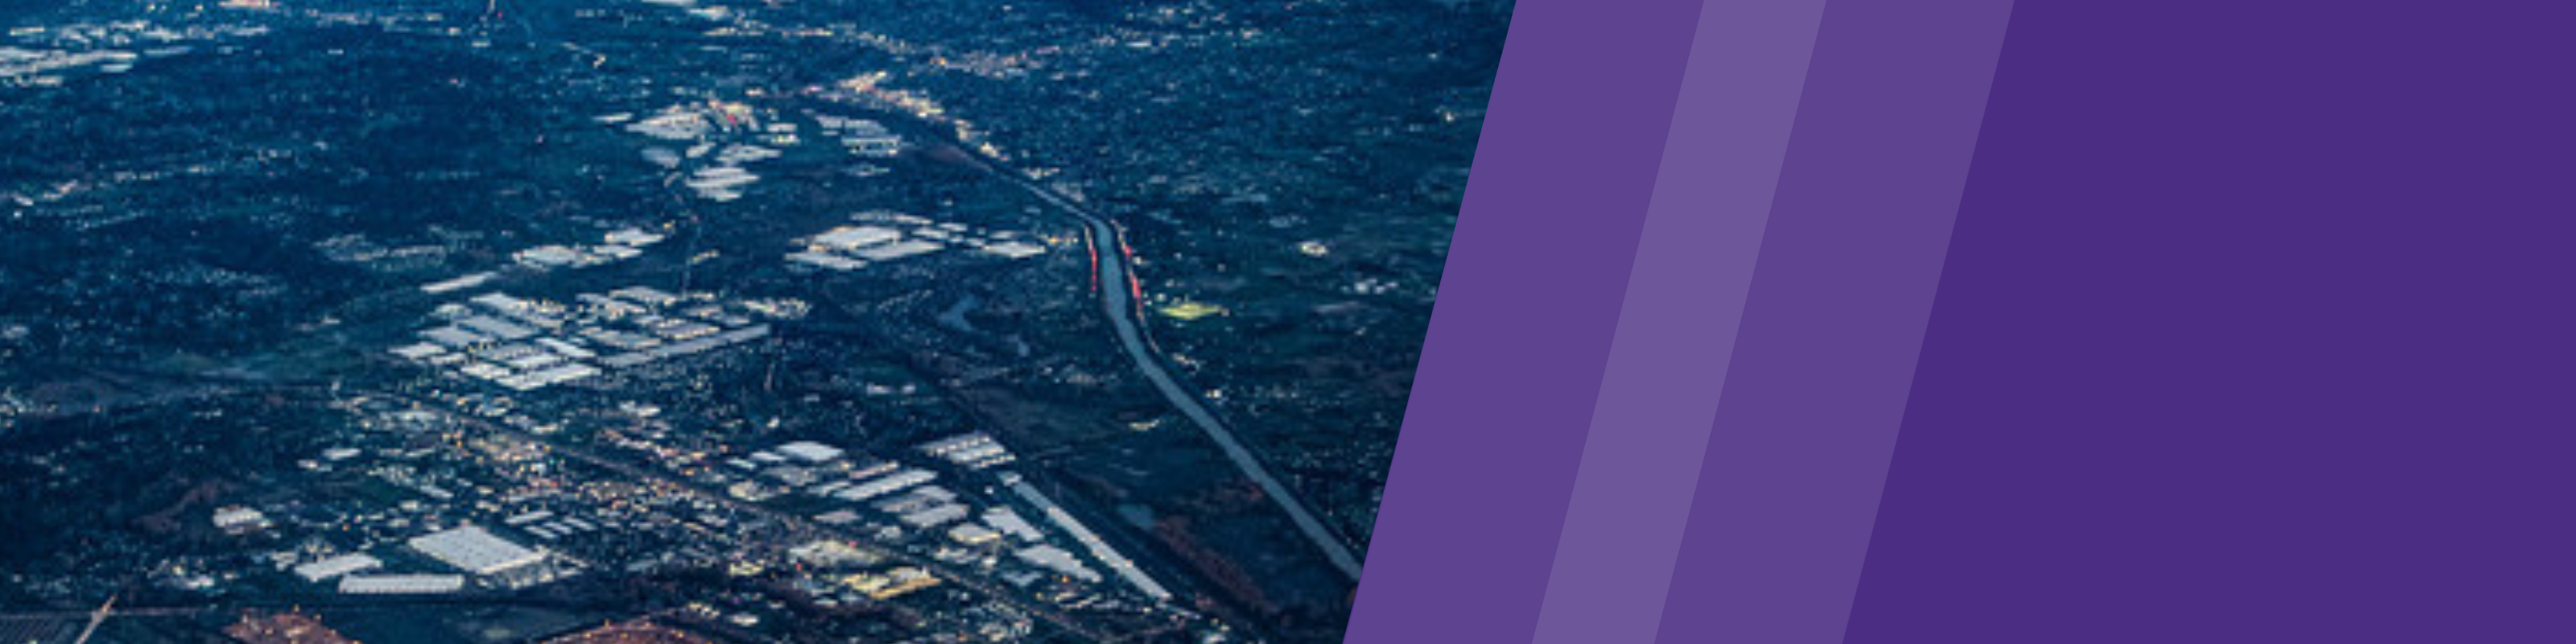 Aerial photo of South Seattle and Duamish River with purple UW brand banner